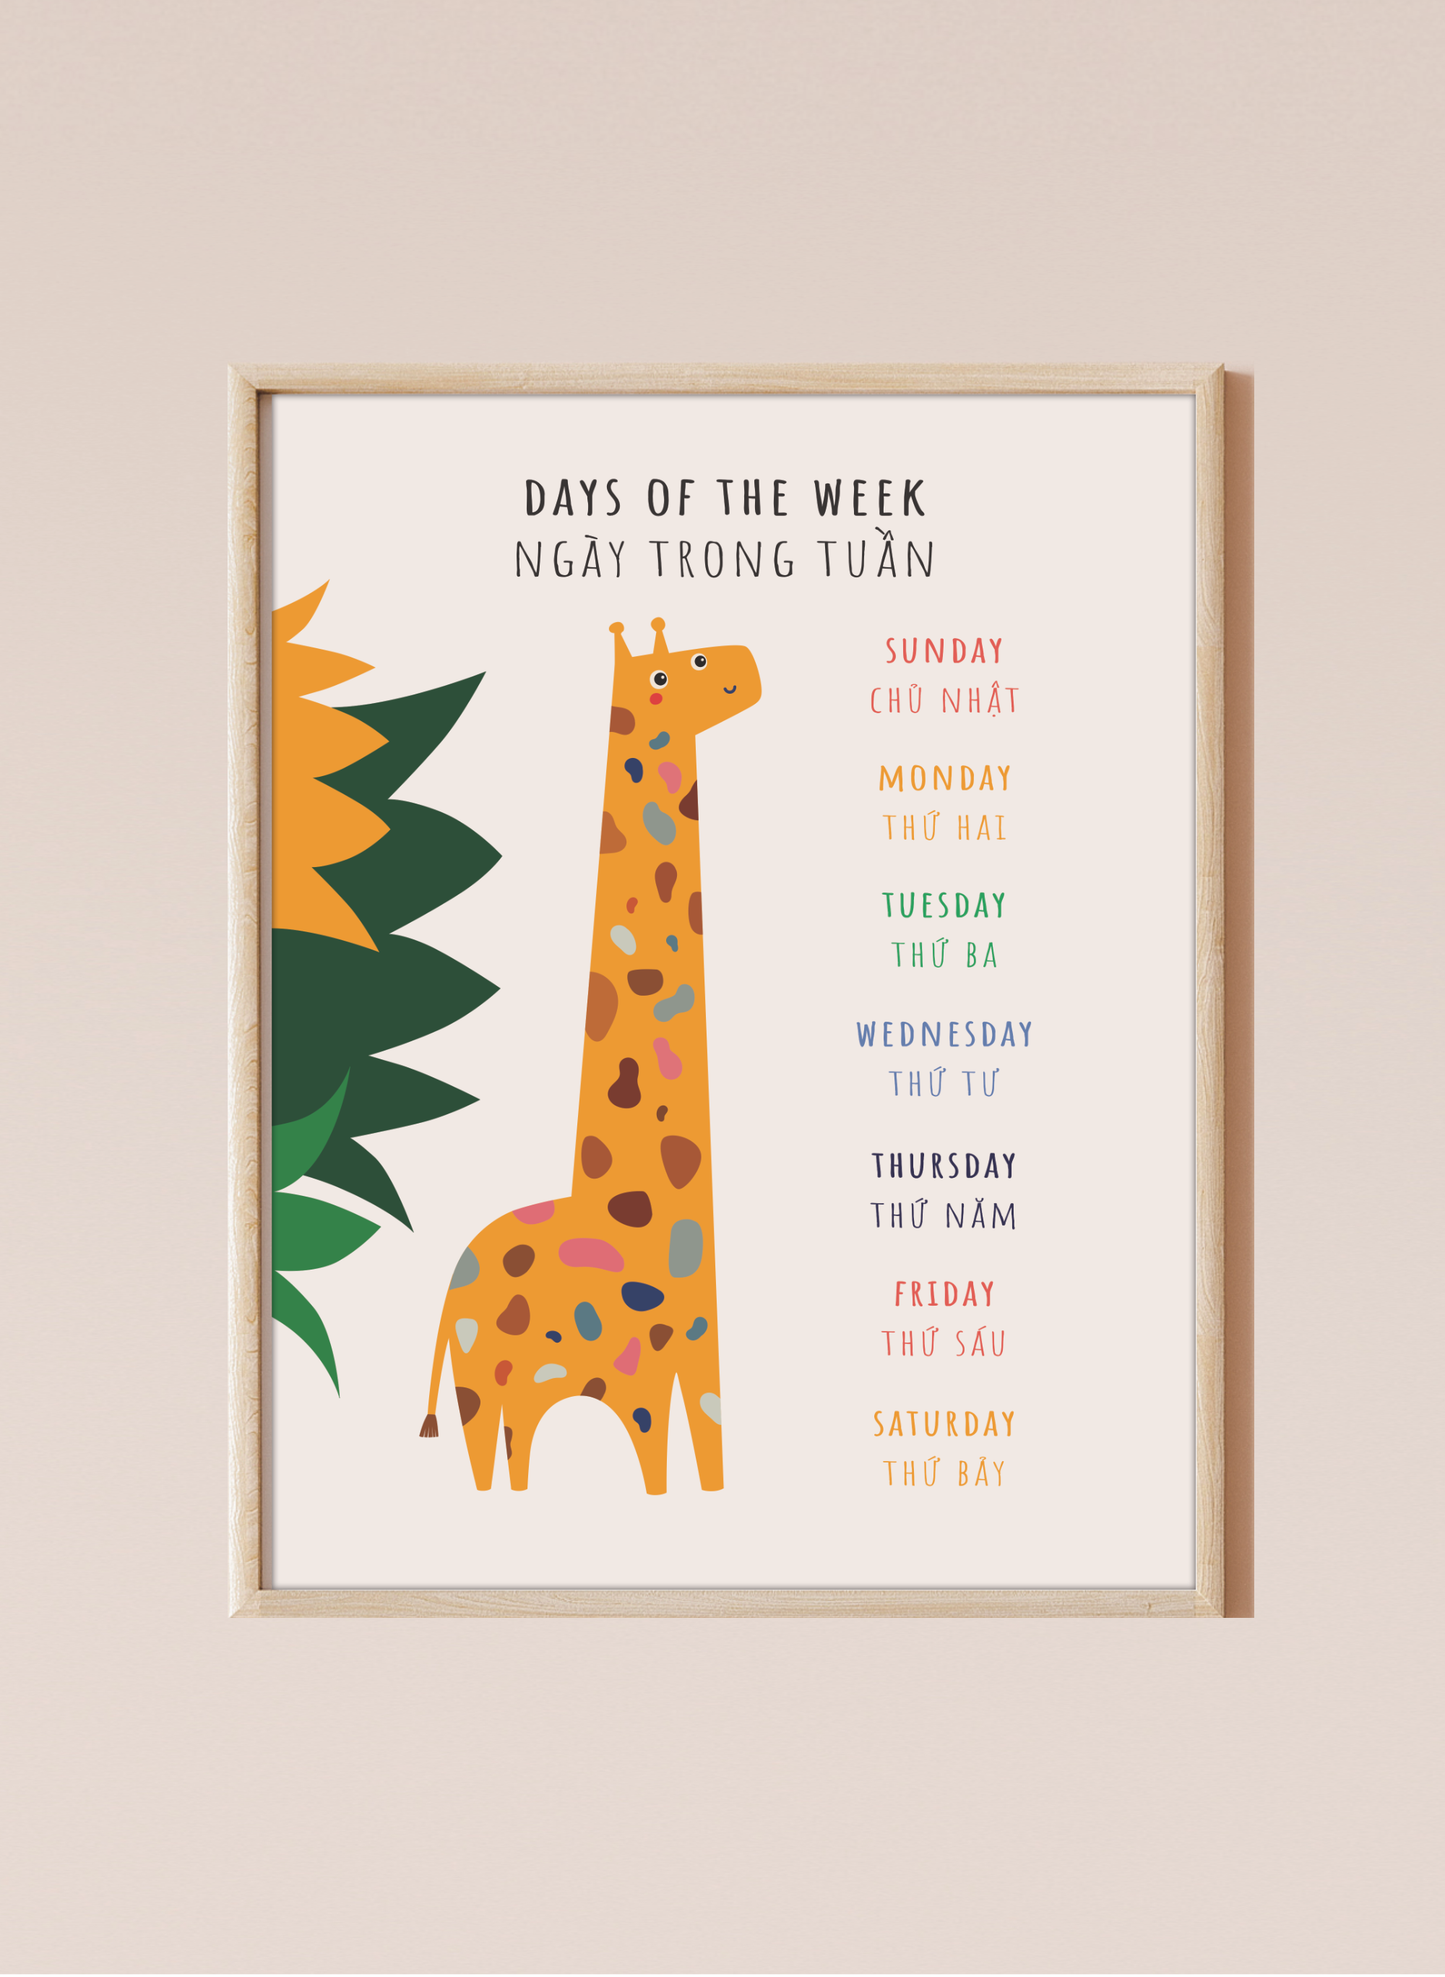 A bilingual educational print featuring the days of the week labeled in English and Vietnamese. The print displays a cute, giraffe featuring the days of the week: Monday, Tuesday, Wednesday, Thursday, Friday, and Saturday . This bilingual display aids in language acquisition and cross-cultural learning and has the perfect aesthetic for a baby nursery, classroom, or other decor. 